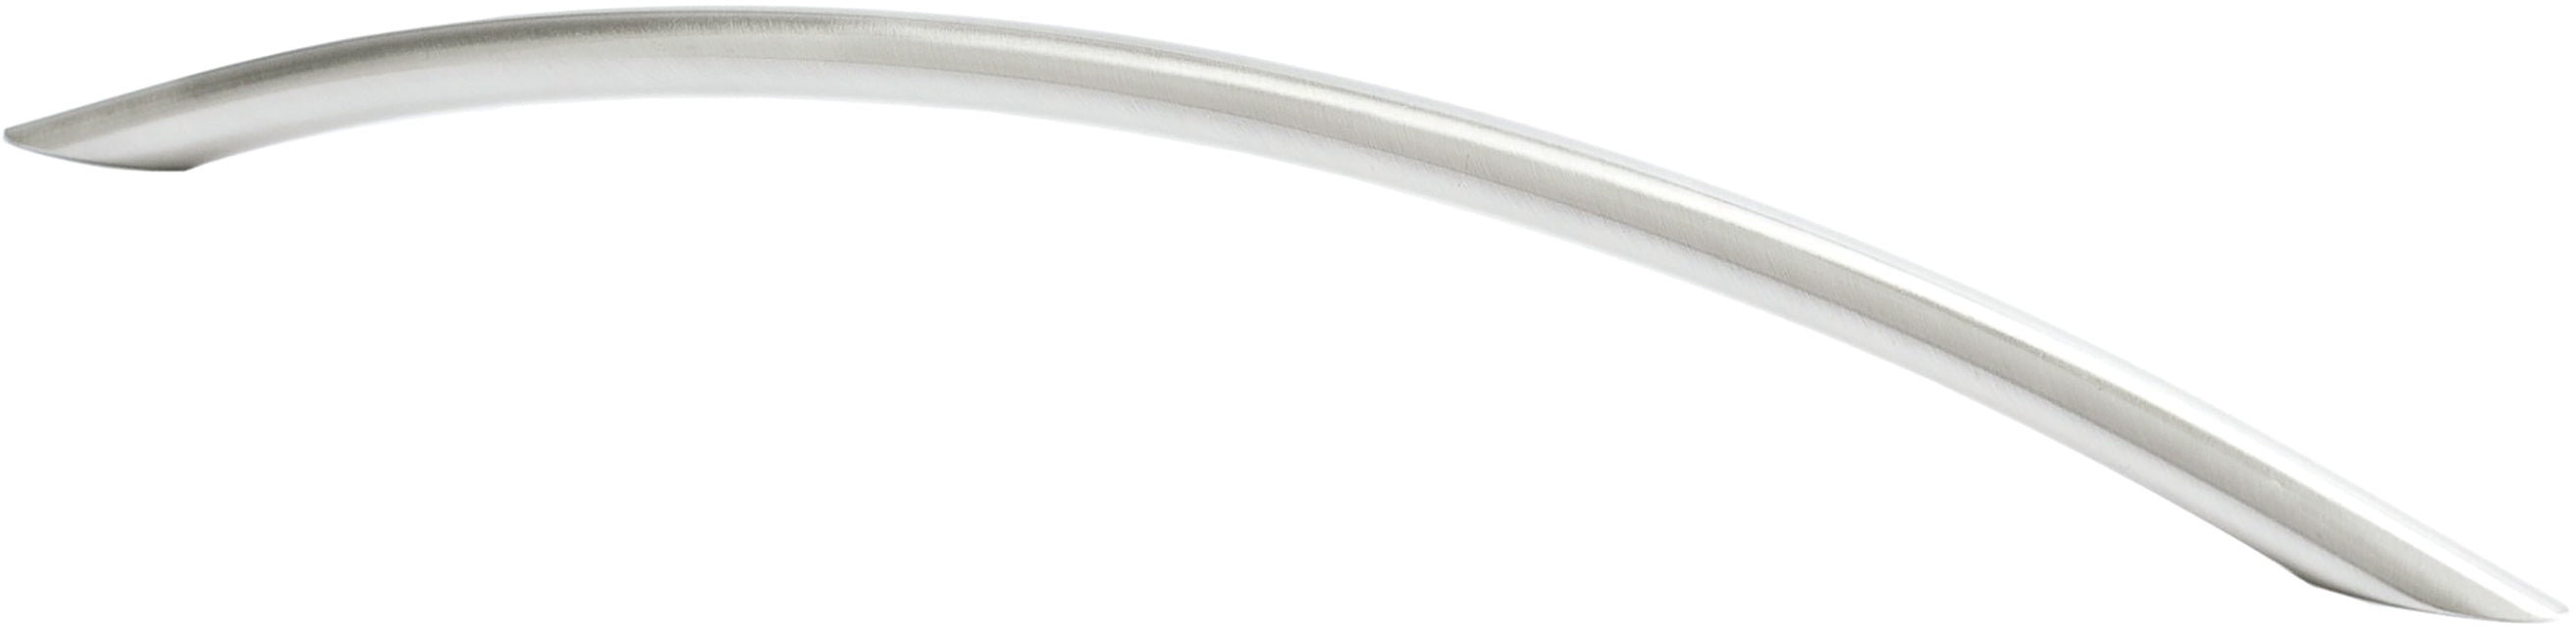 288mm Bow Pull Brushed Nickel - Alto Collection